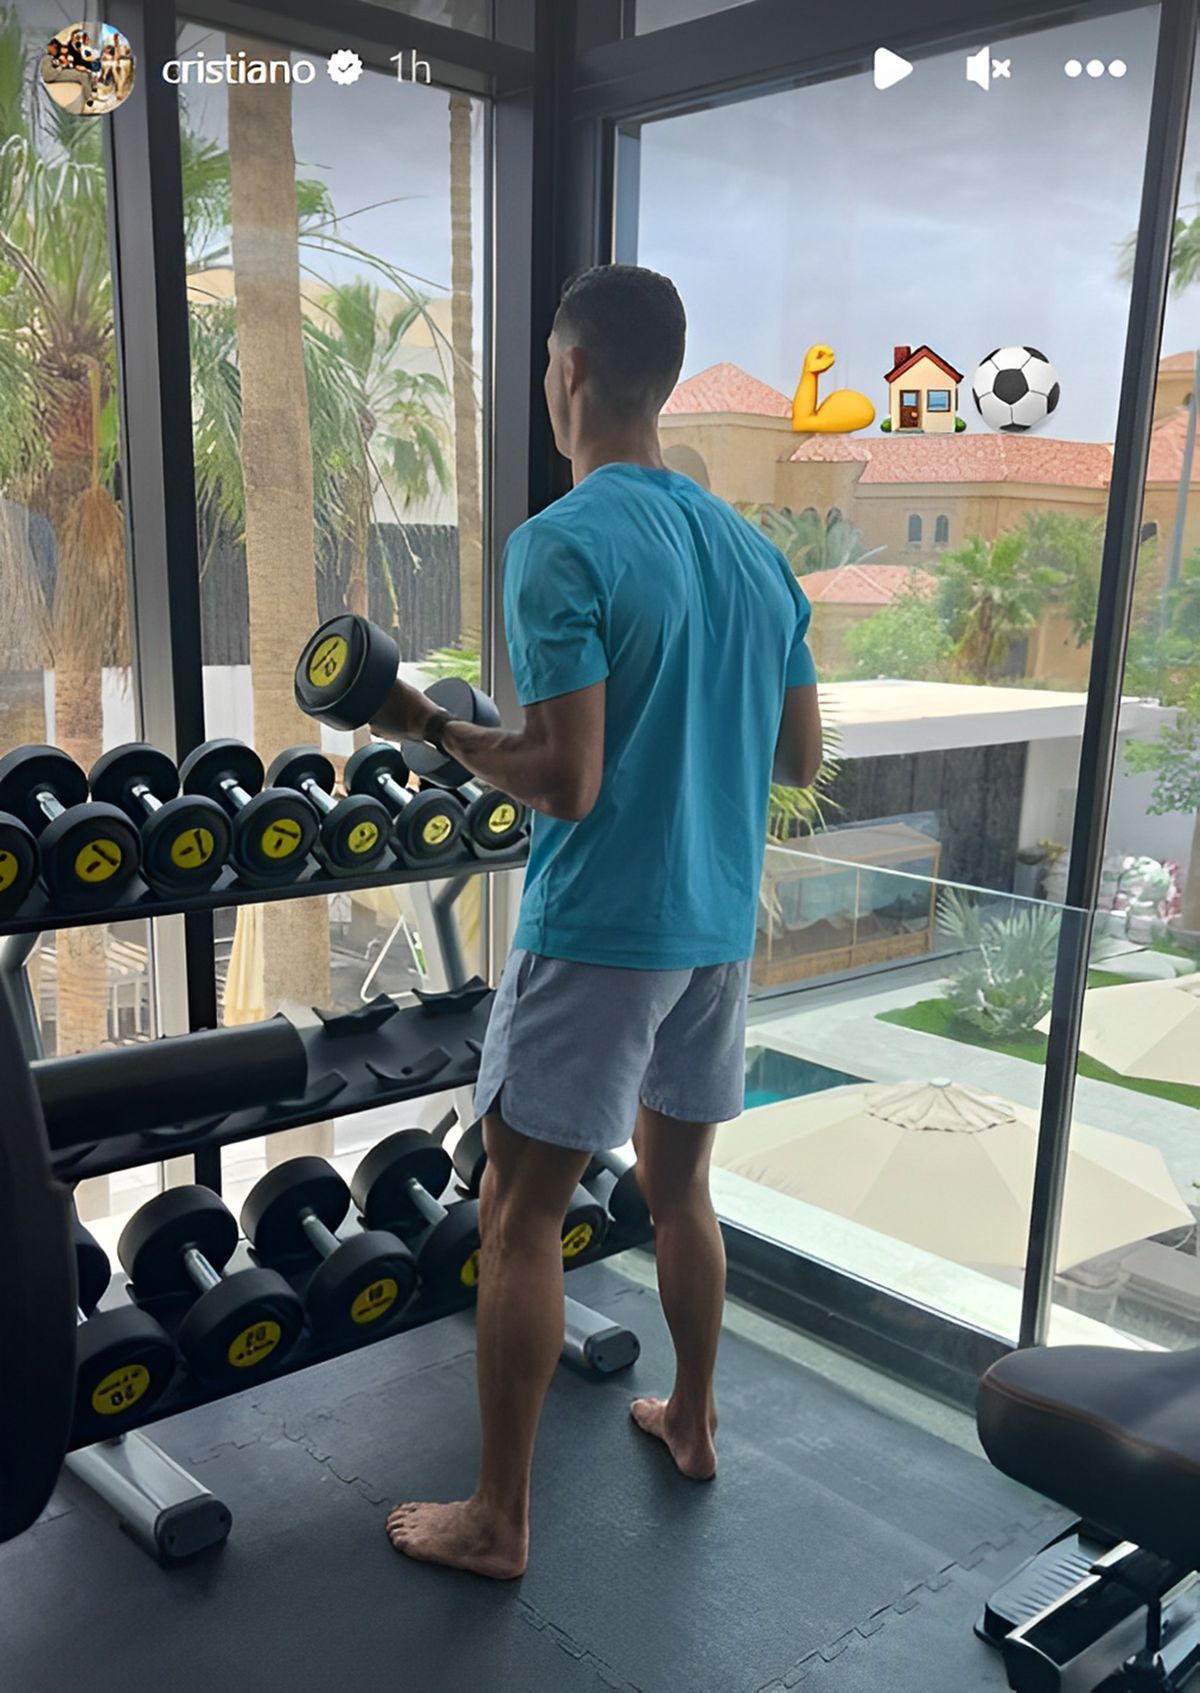 The 38-year-old pictured during a home workout drill. (Instagram/@cristiano)